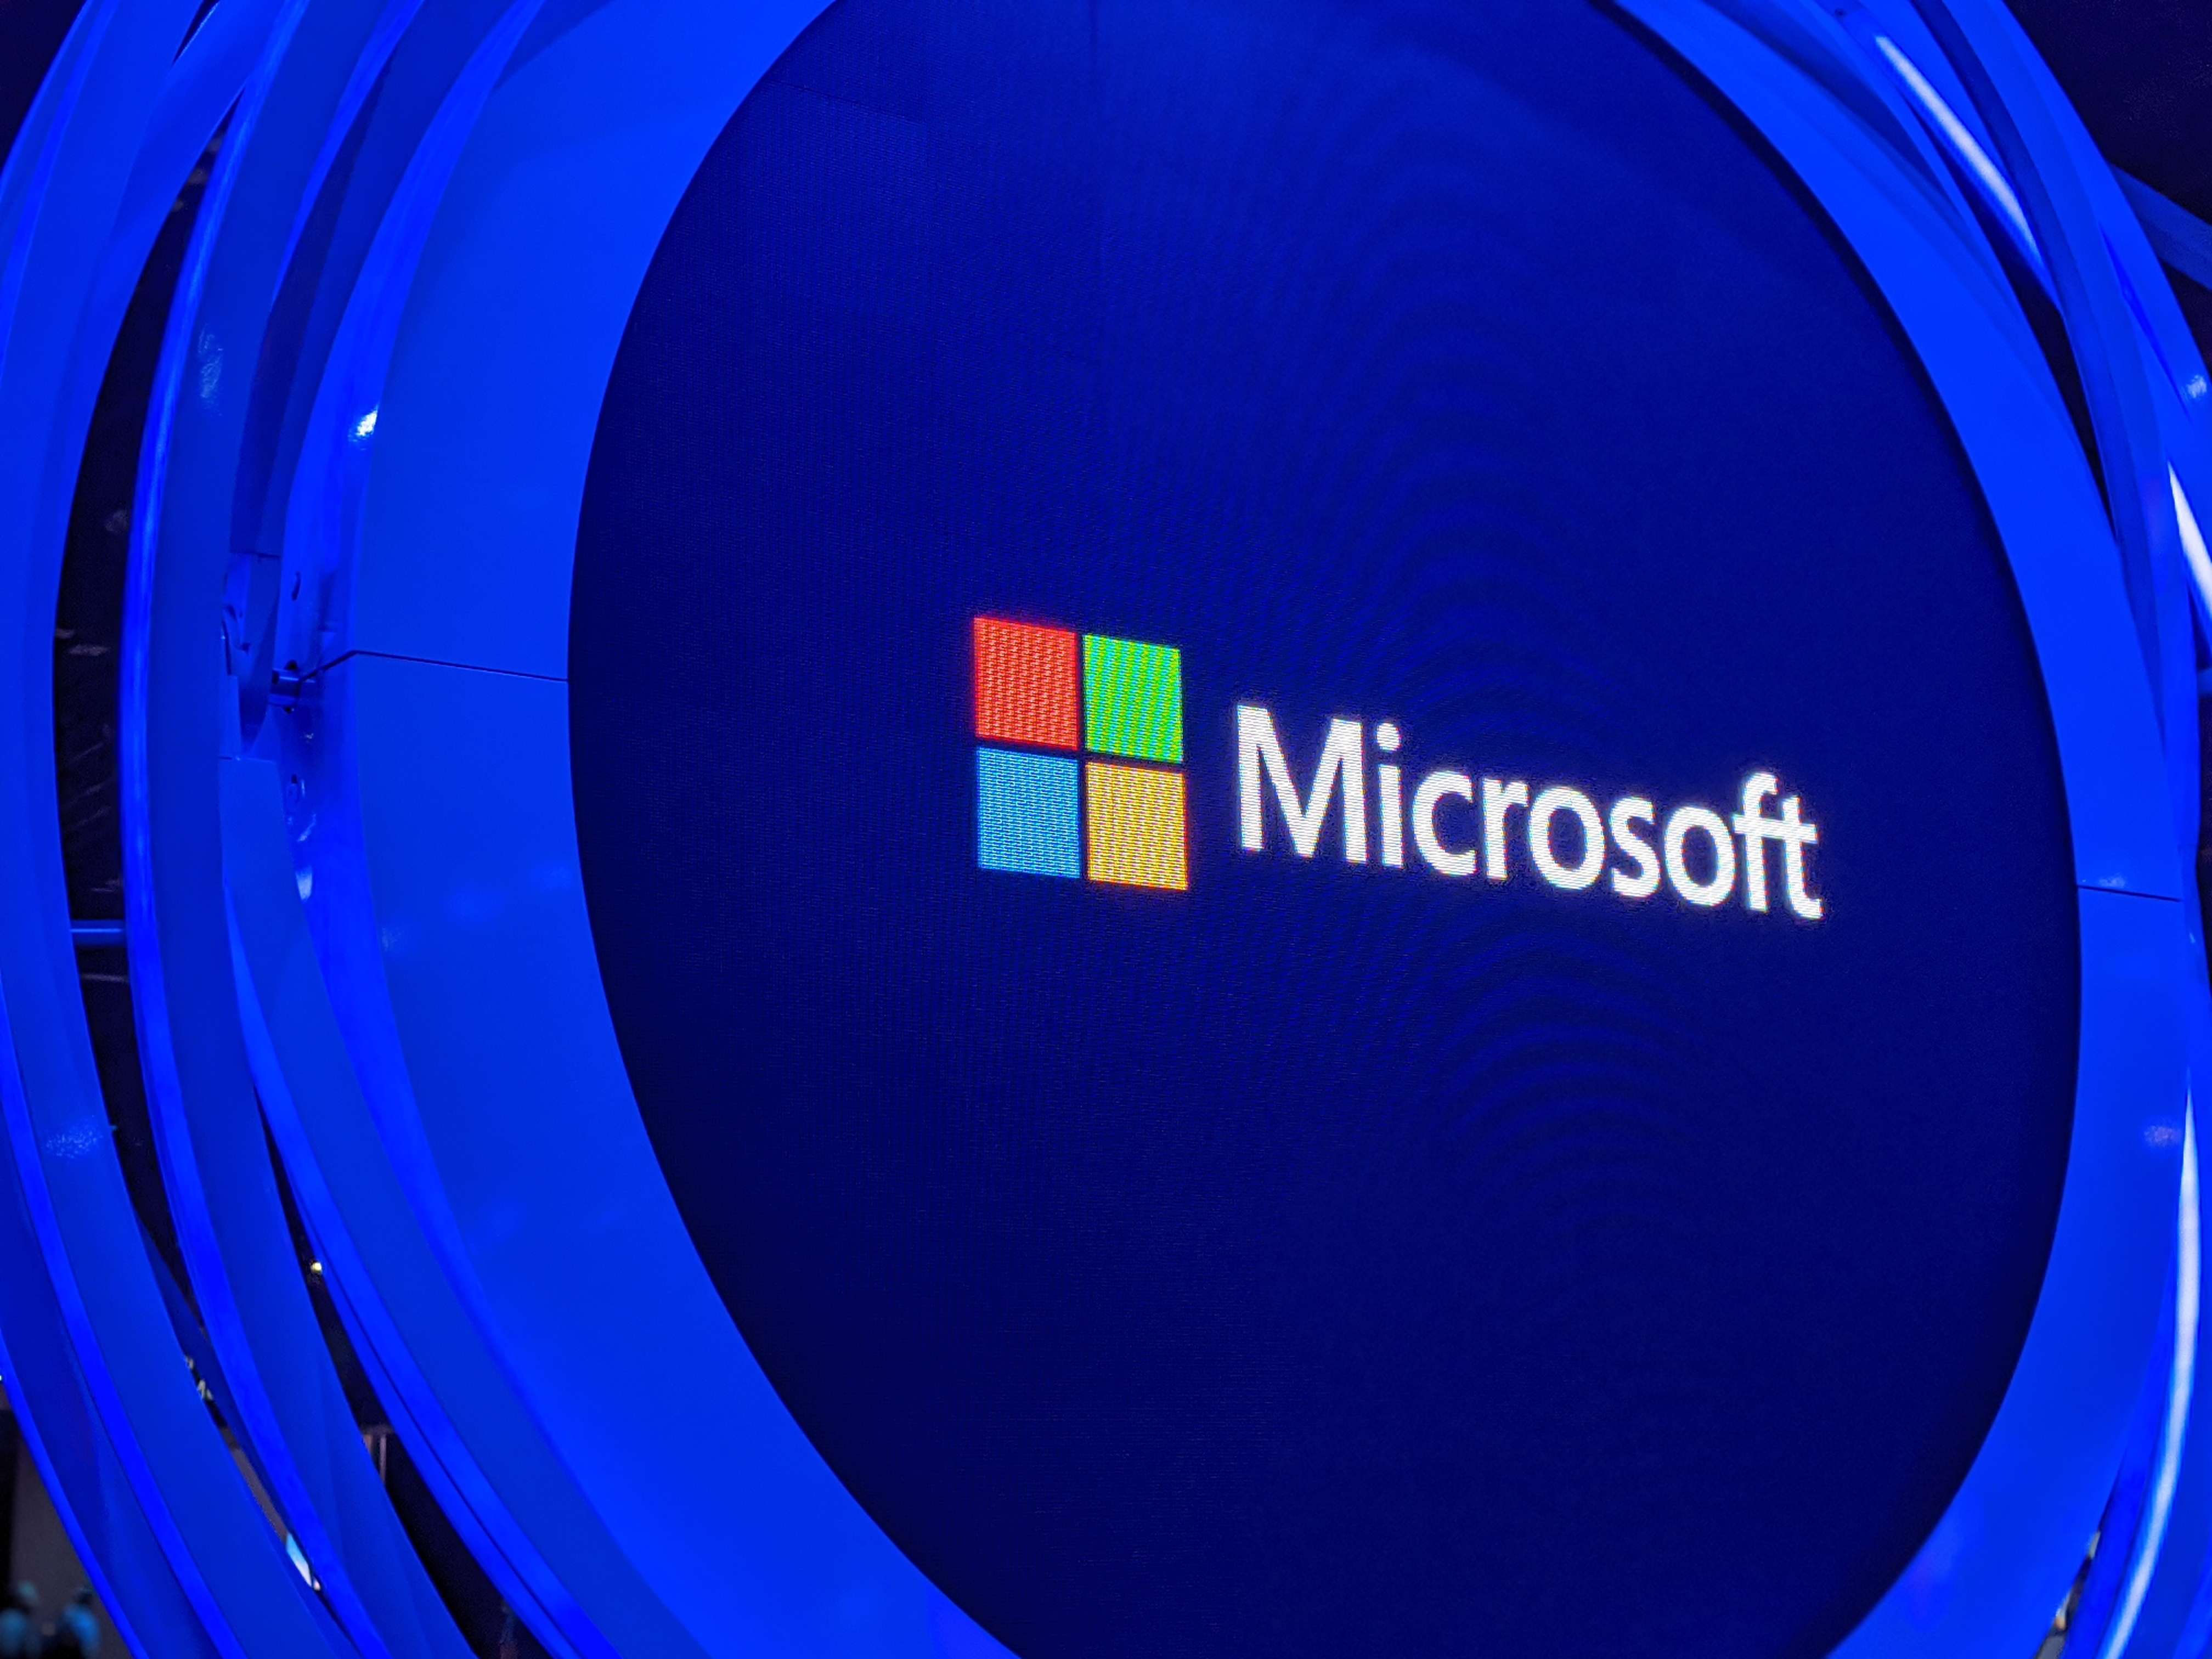 How Microsoft is trying to become more innovative